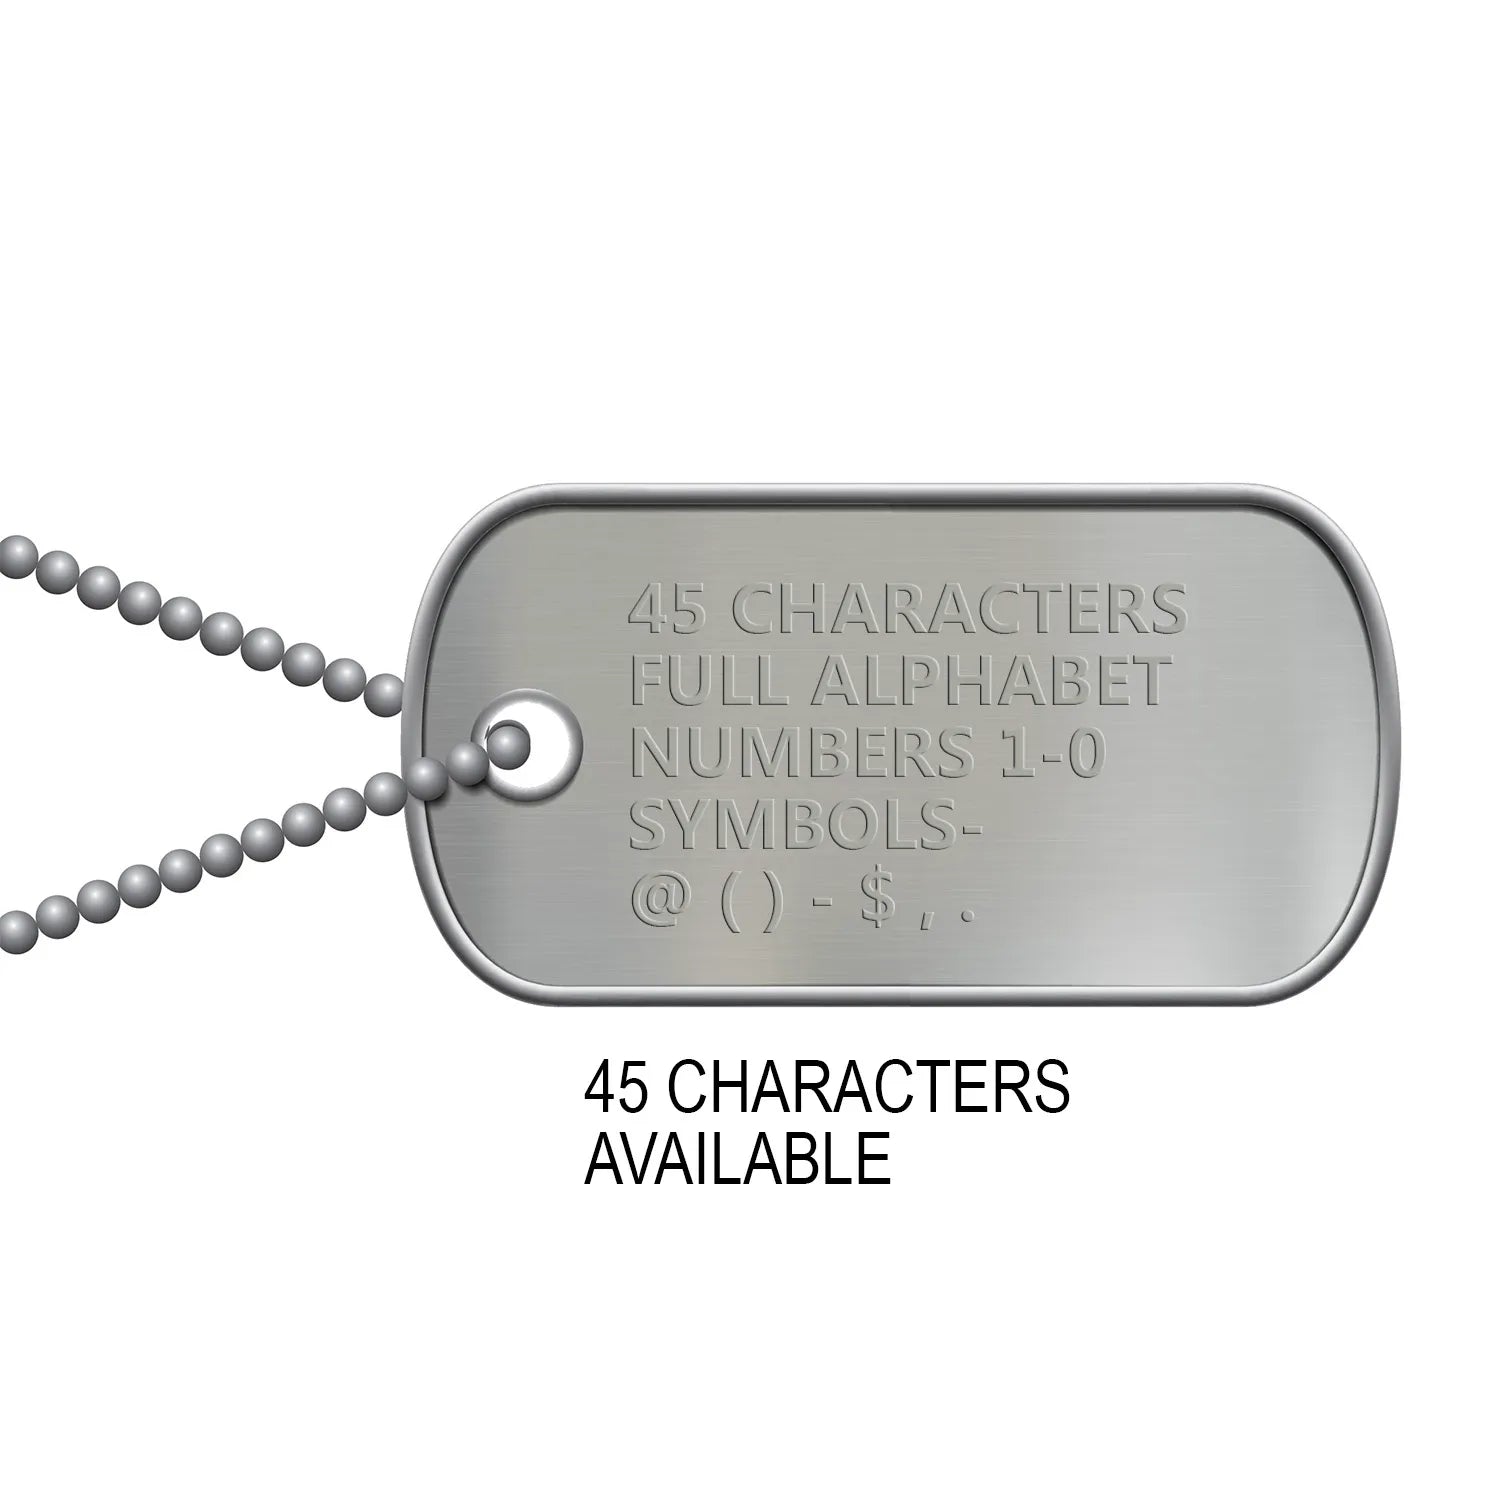 45 Characters available